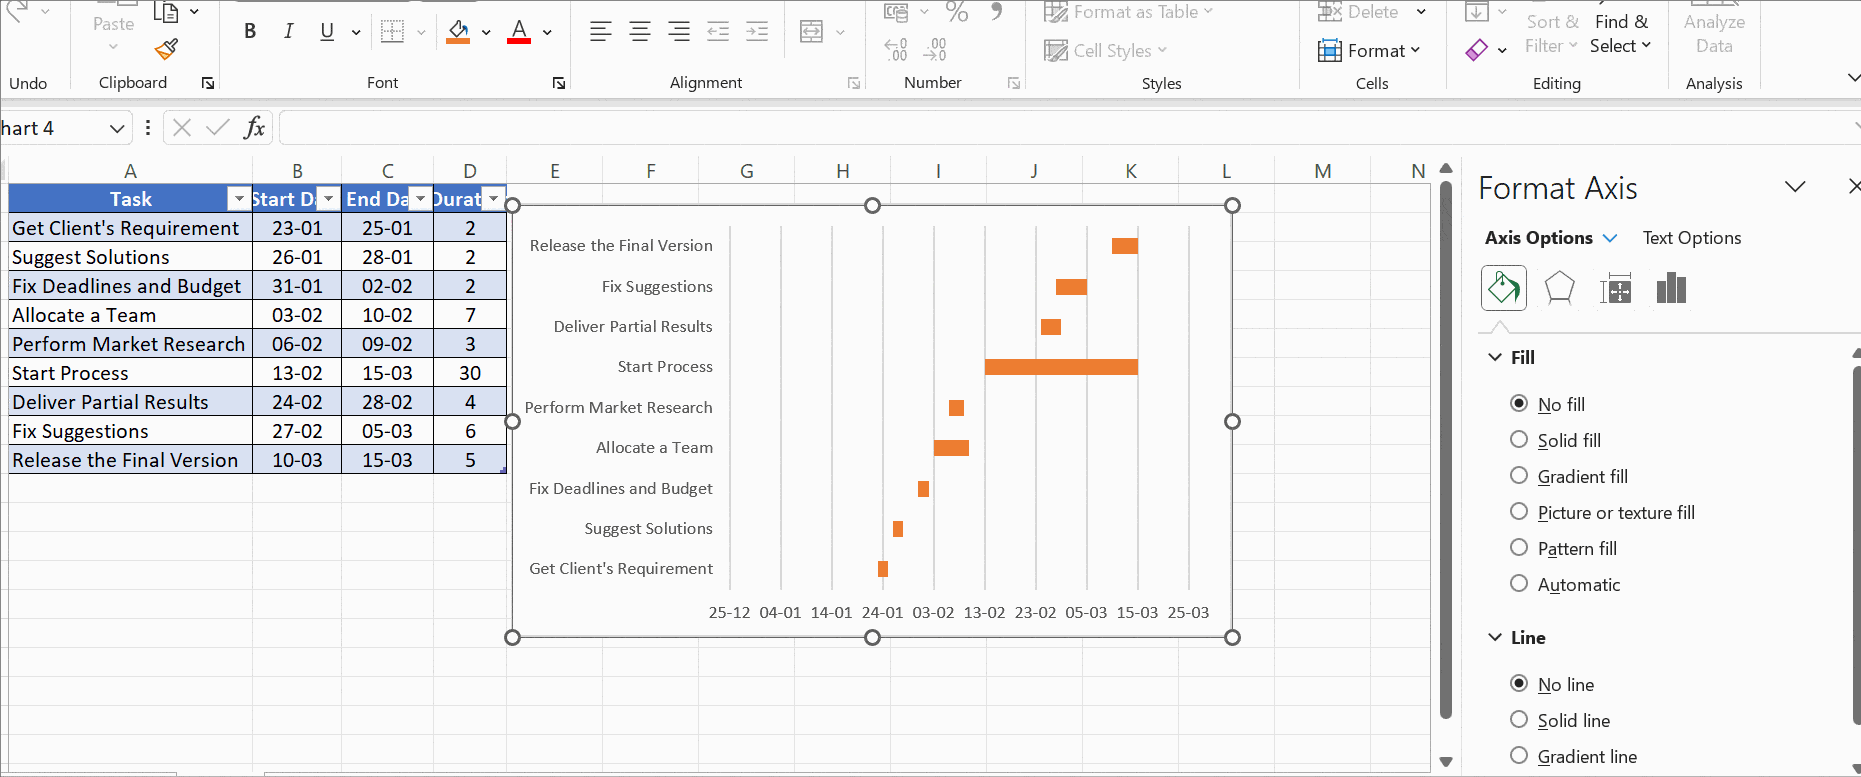 Step-by-Step Guide to Creating a Gantt Chart in Excel | AOLCC